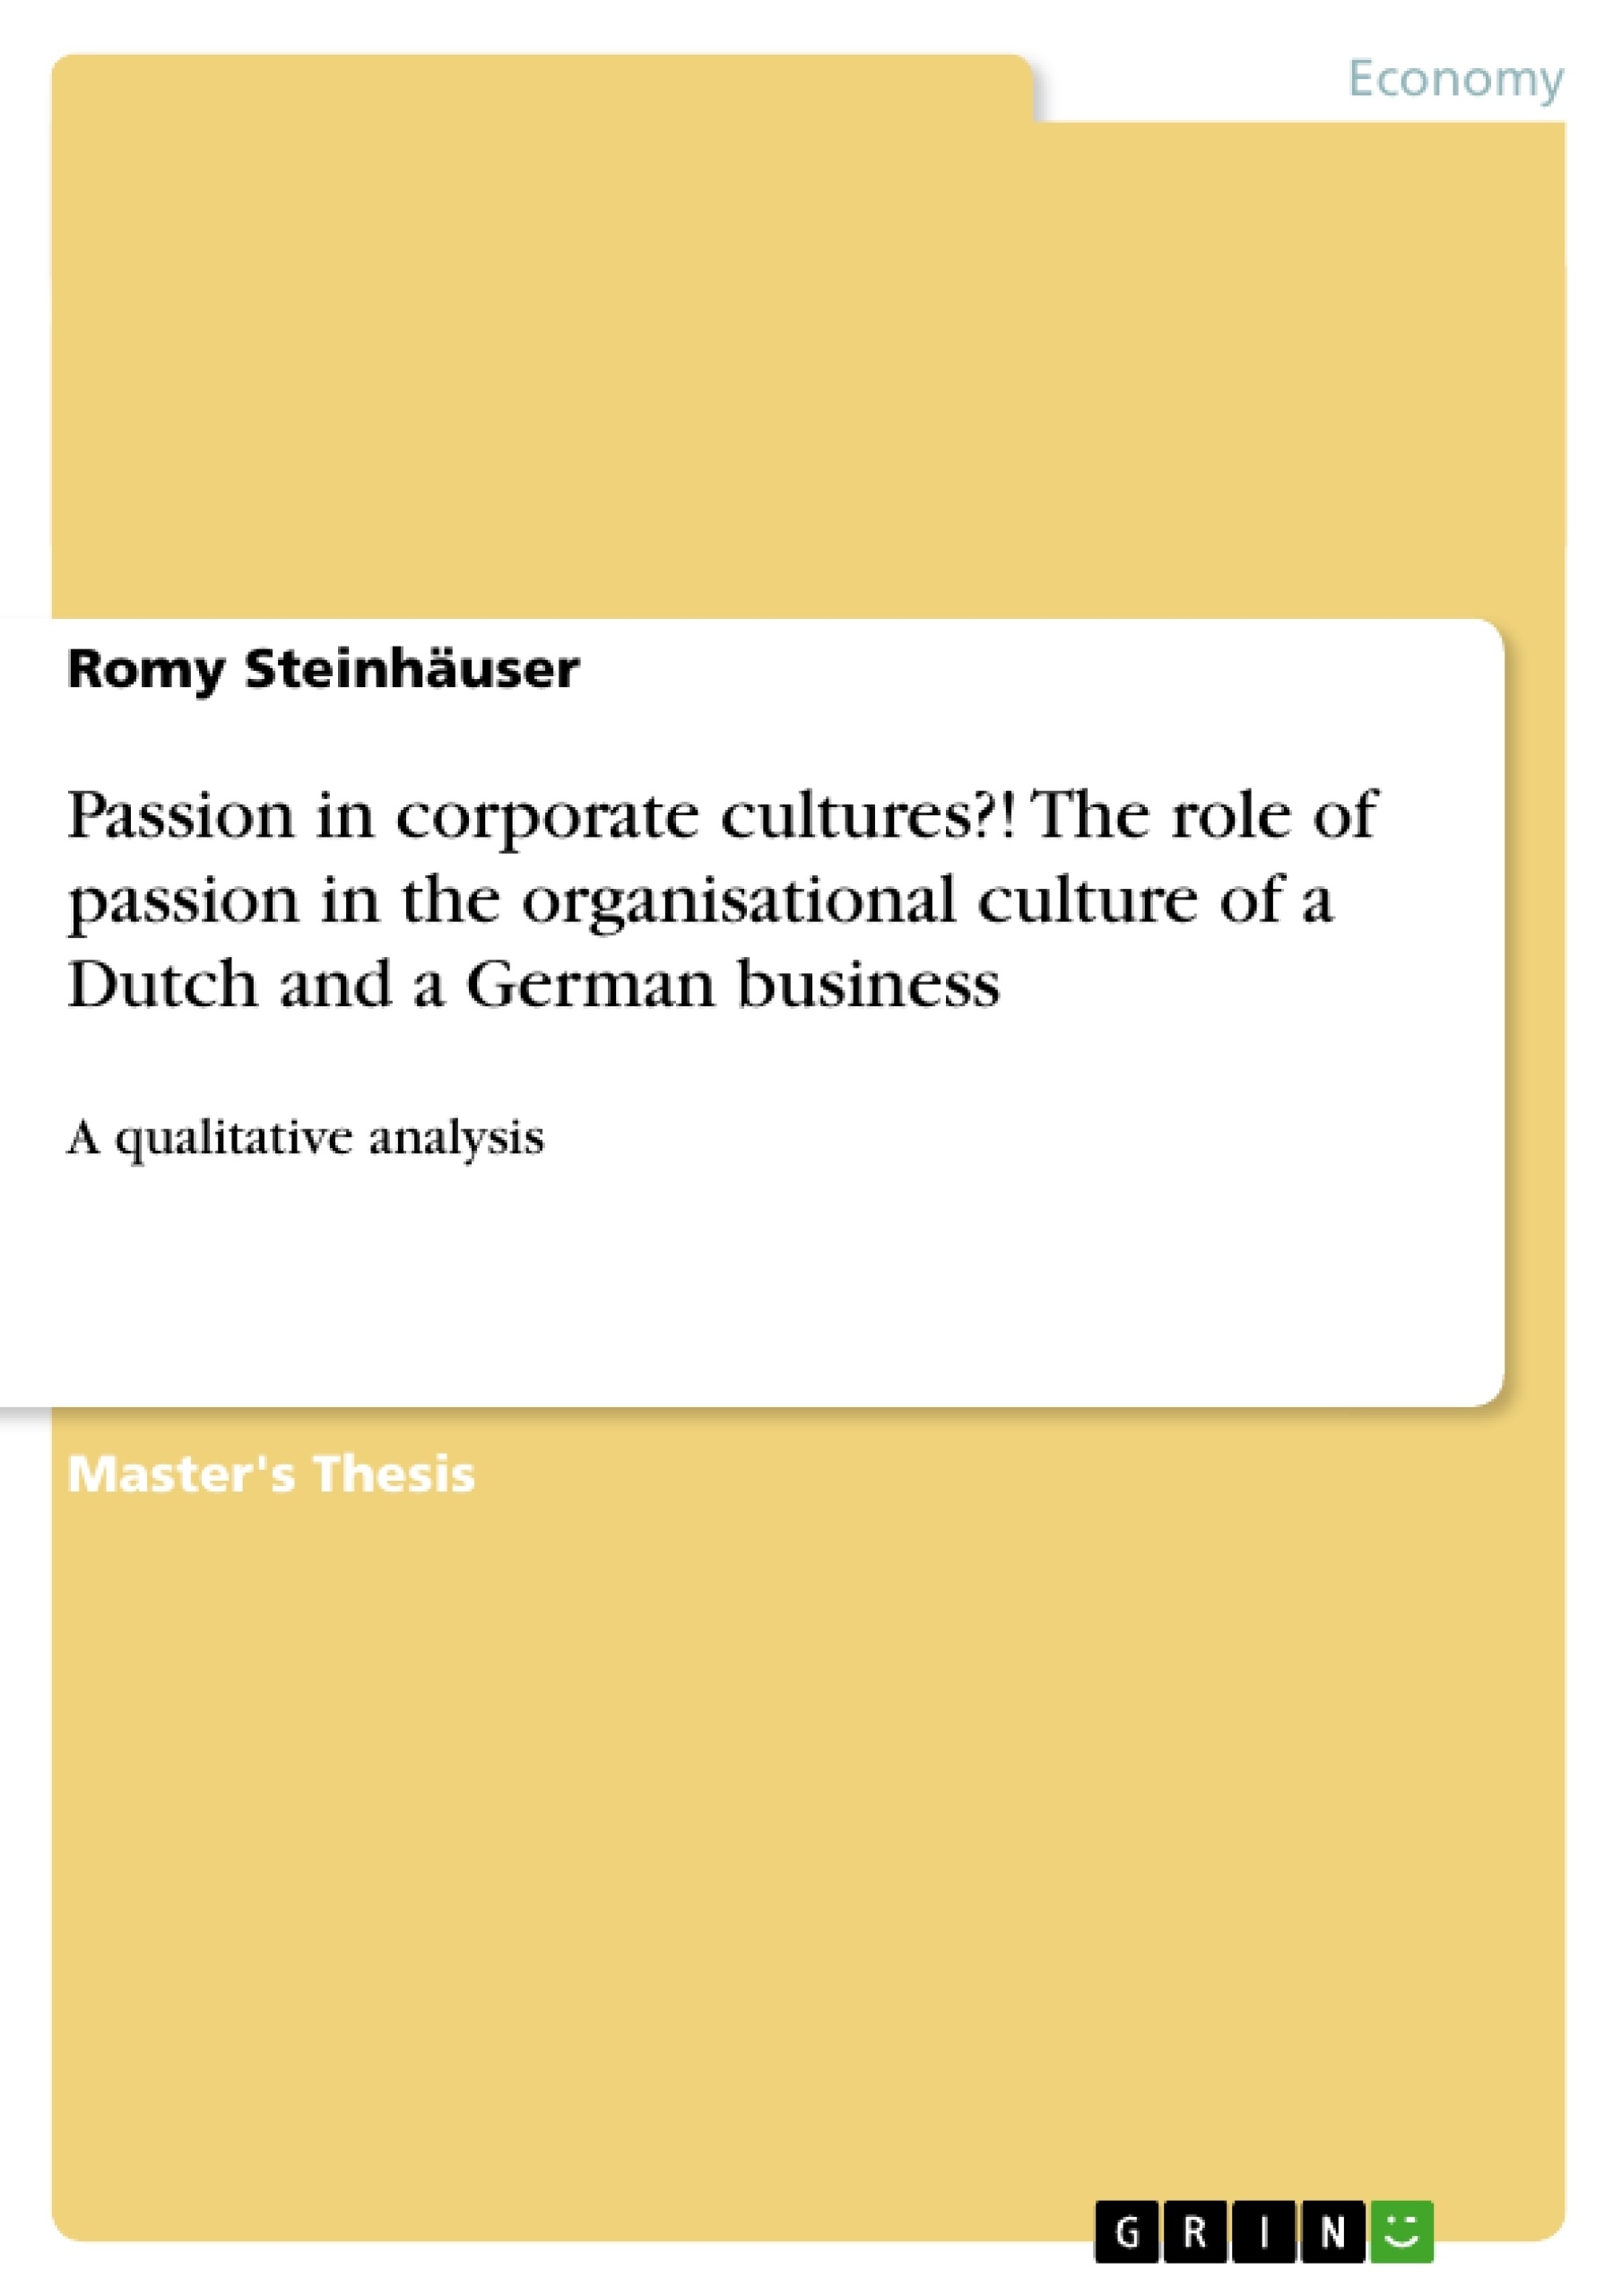 Titre: Passion in corporate cultures?! The role of passion in the organisational culture of a Dutch and a German business